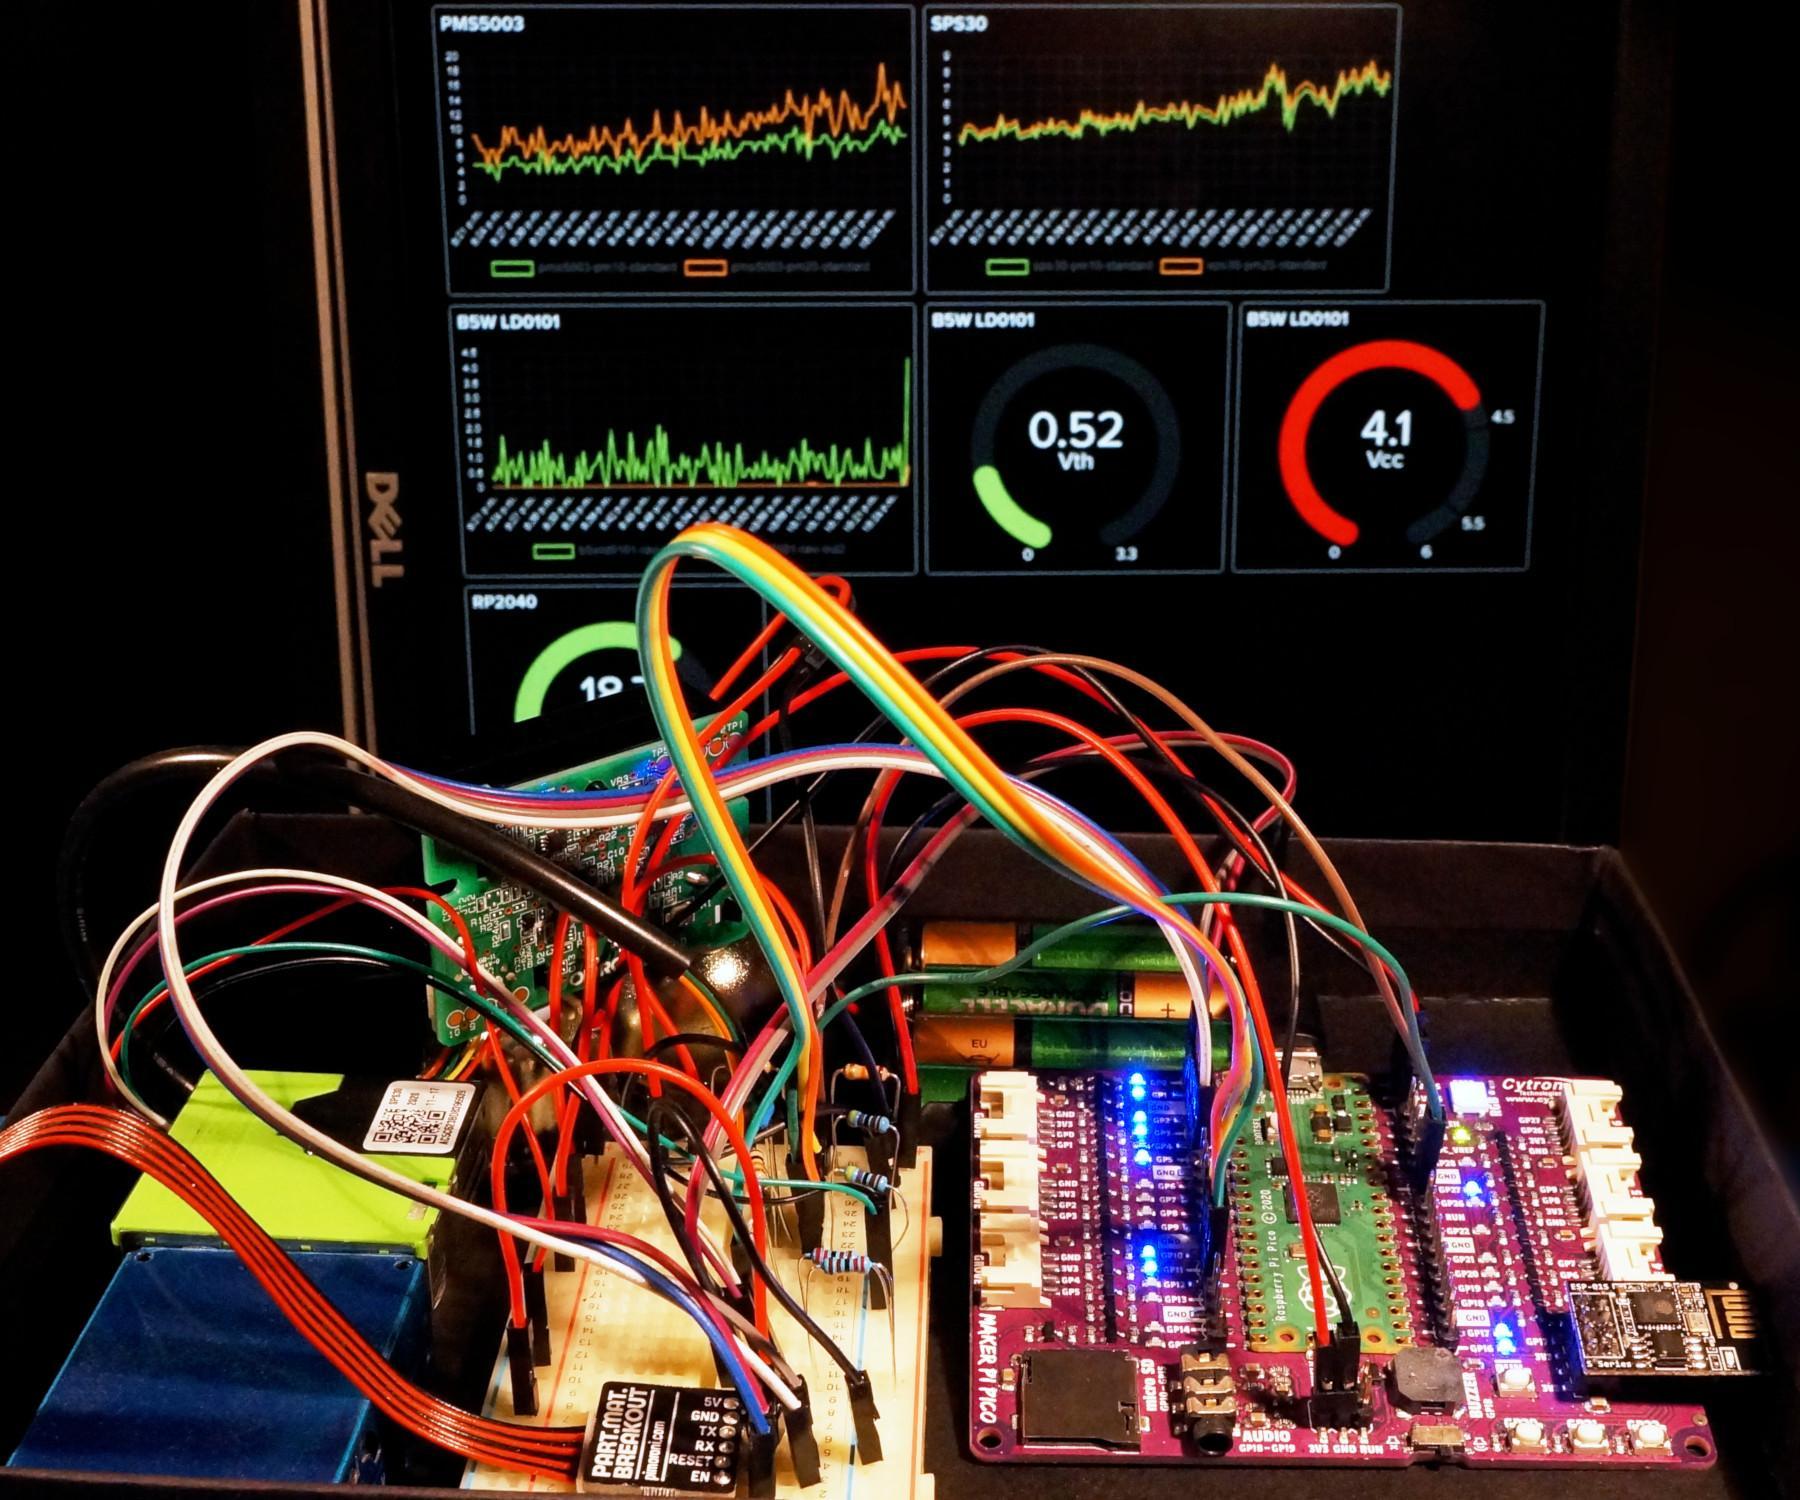 Publishing Particulate Matter Sensor Data to Adafruit IO With Maker Pi Pico and ESP-01S